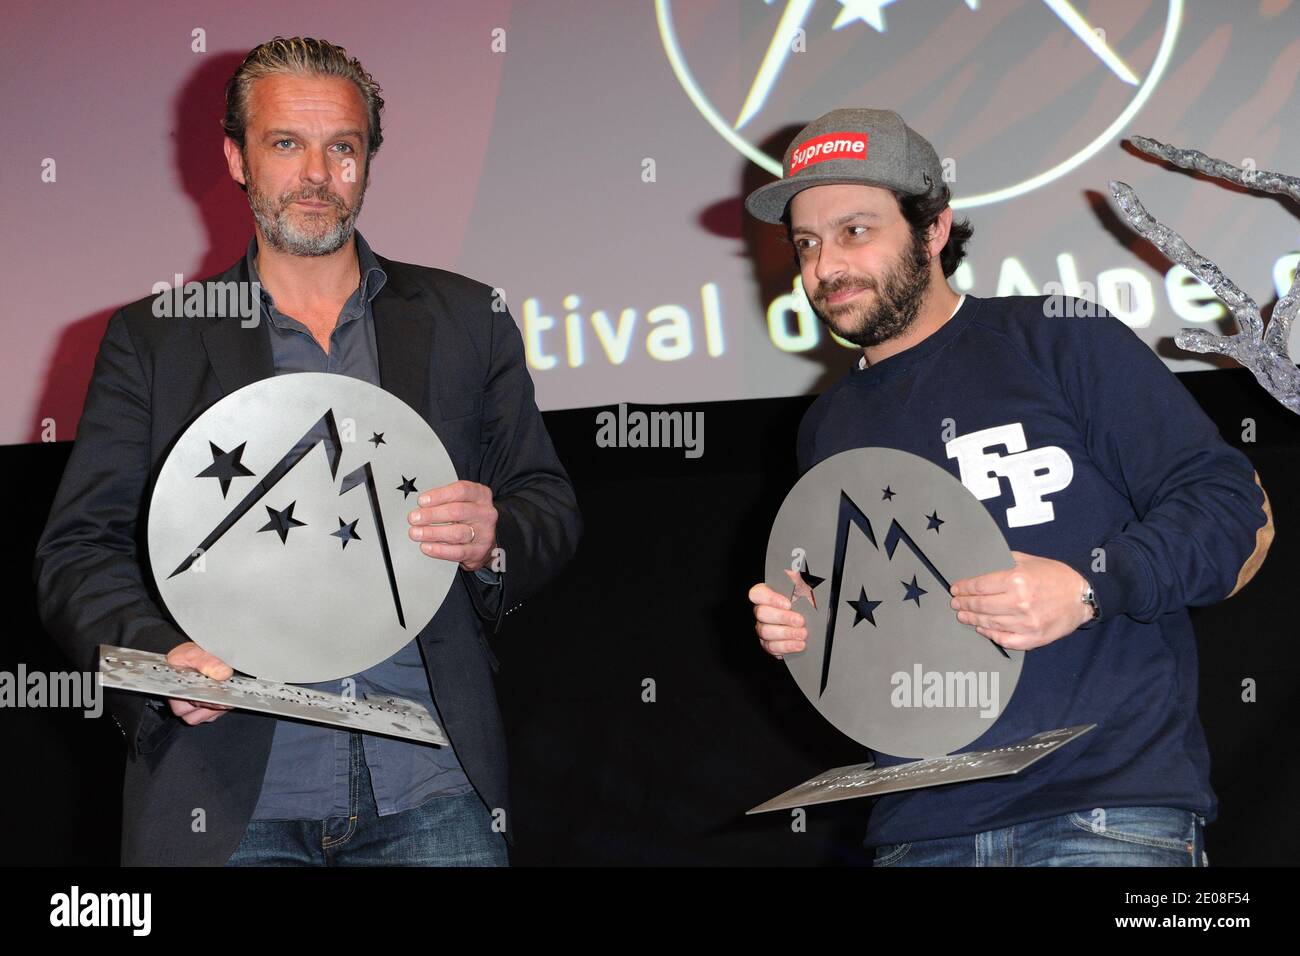 David Brecourt and Romain Levy pose after receiving the price for best  actor during closing and awards ceremony at the 15th Alpe d'Huez Comedy  Film Festival held in l'Alpe d'Huez, France on